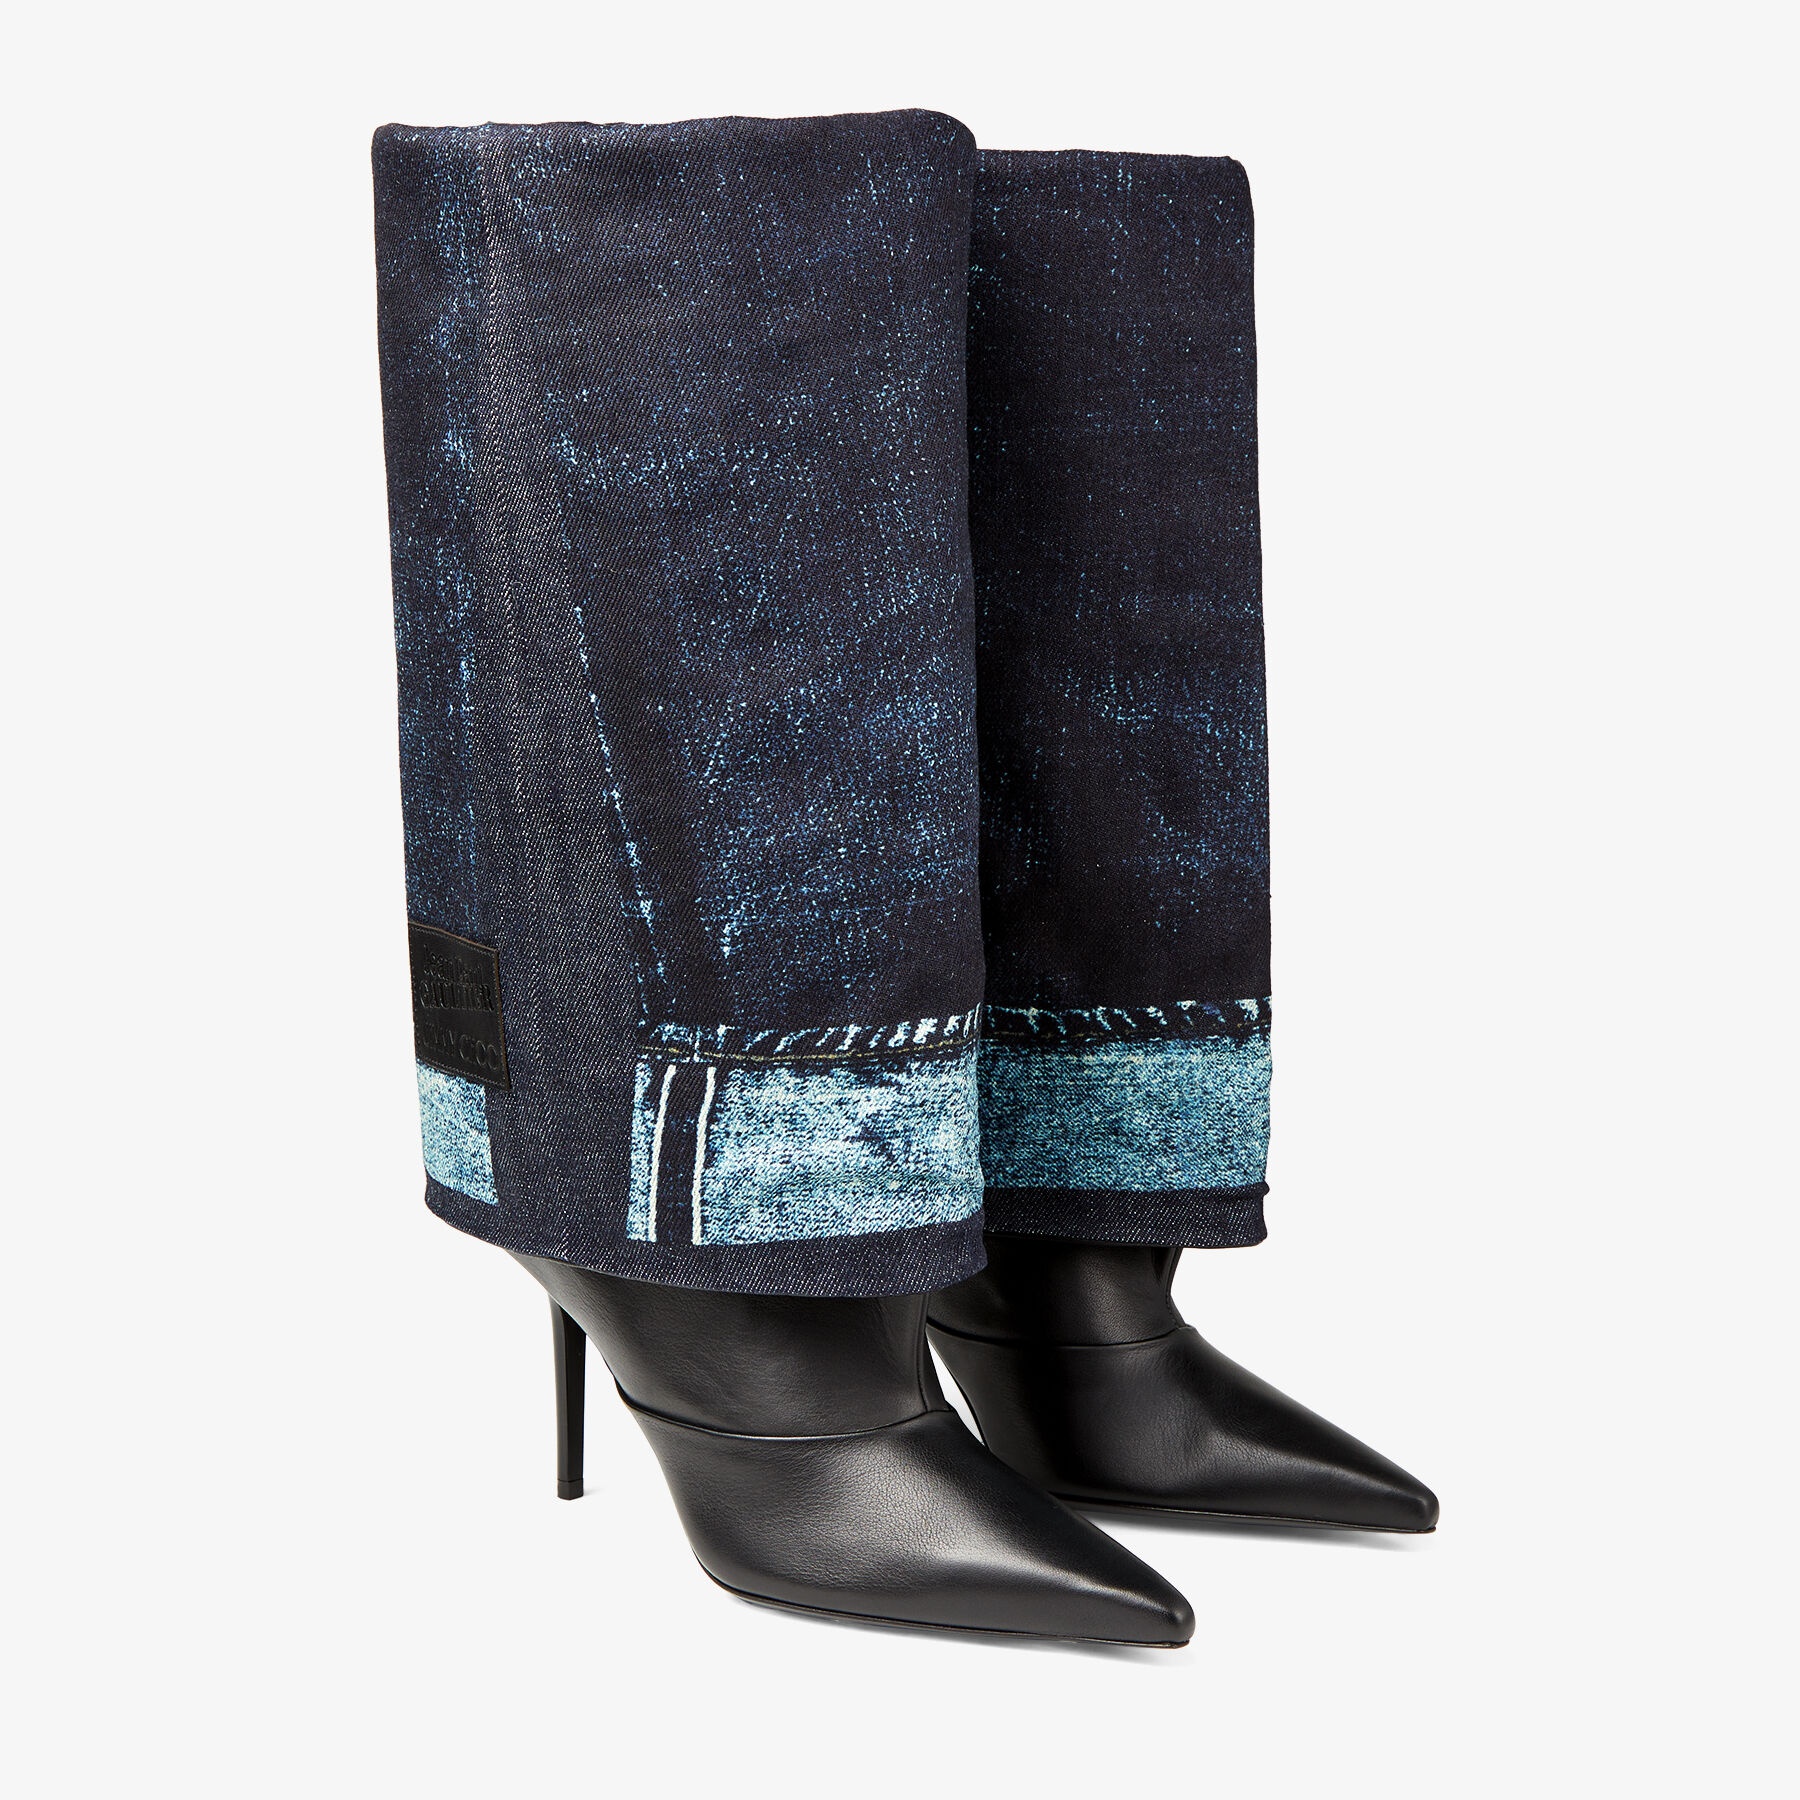 Jimmy Choo / Jean Paul Gaultier Cuff Over The Knee Boot 90
Black Calf Leather Over-The-Knee Boots wi - 3